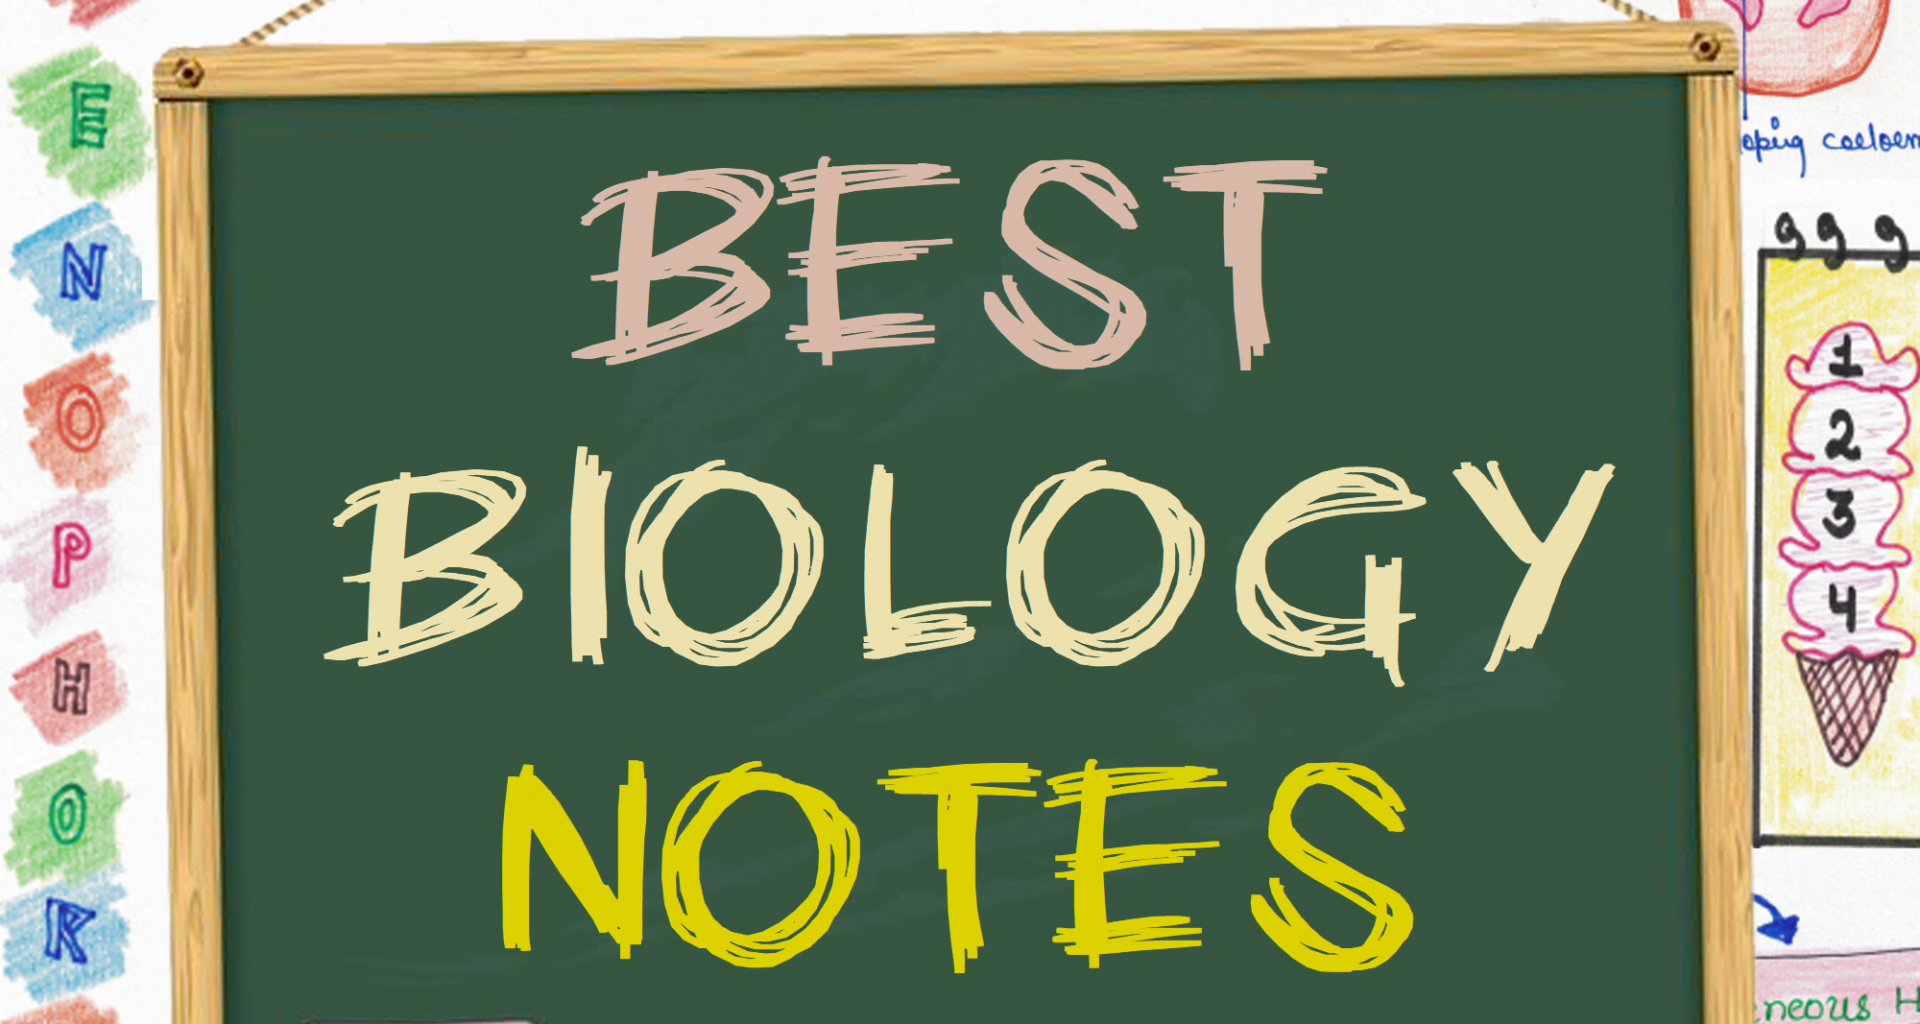 NEET notes for biology